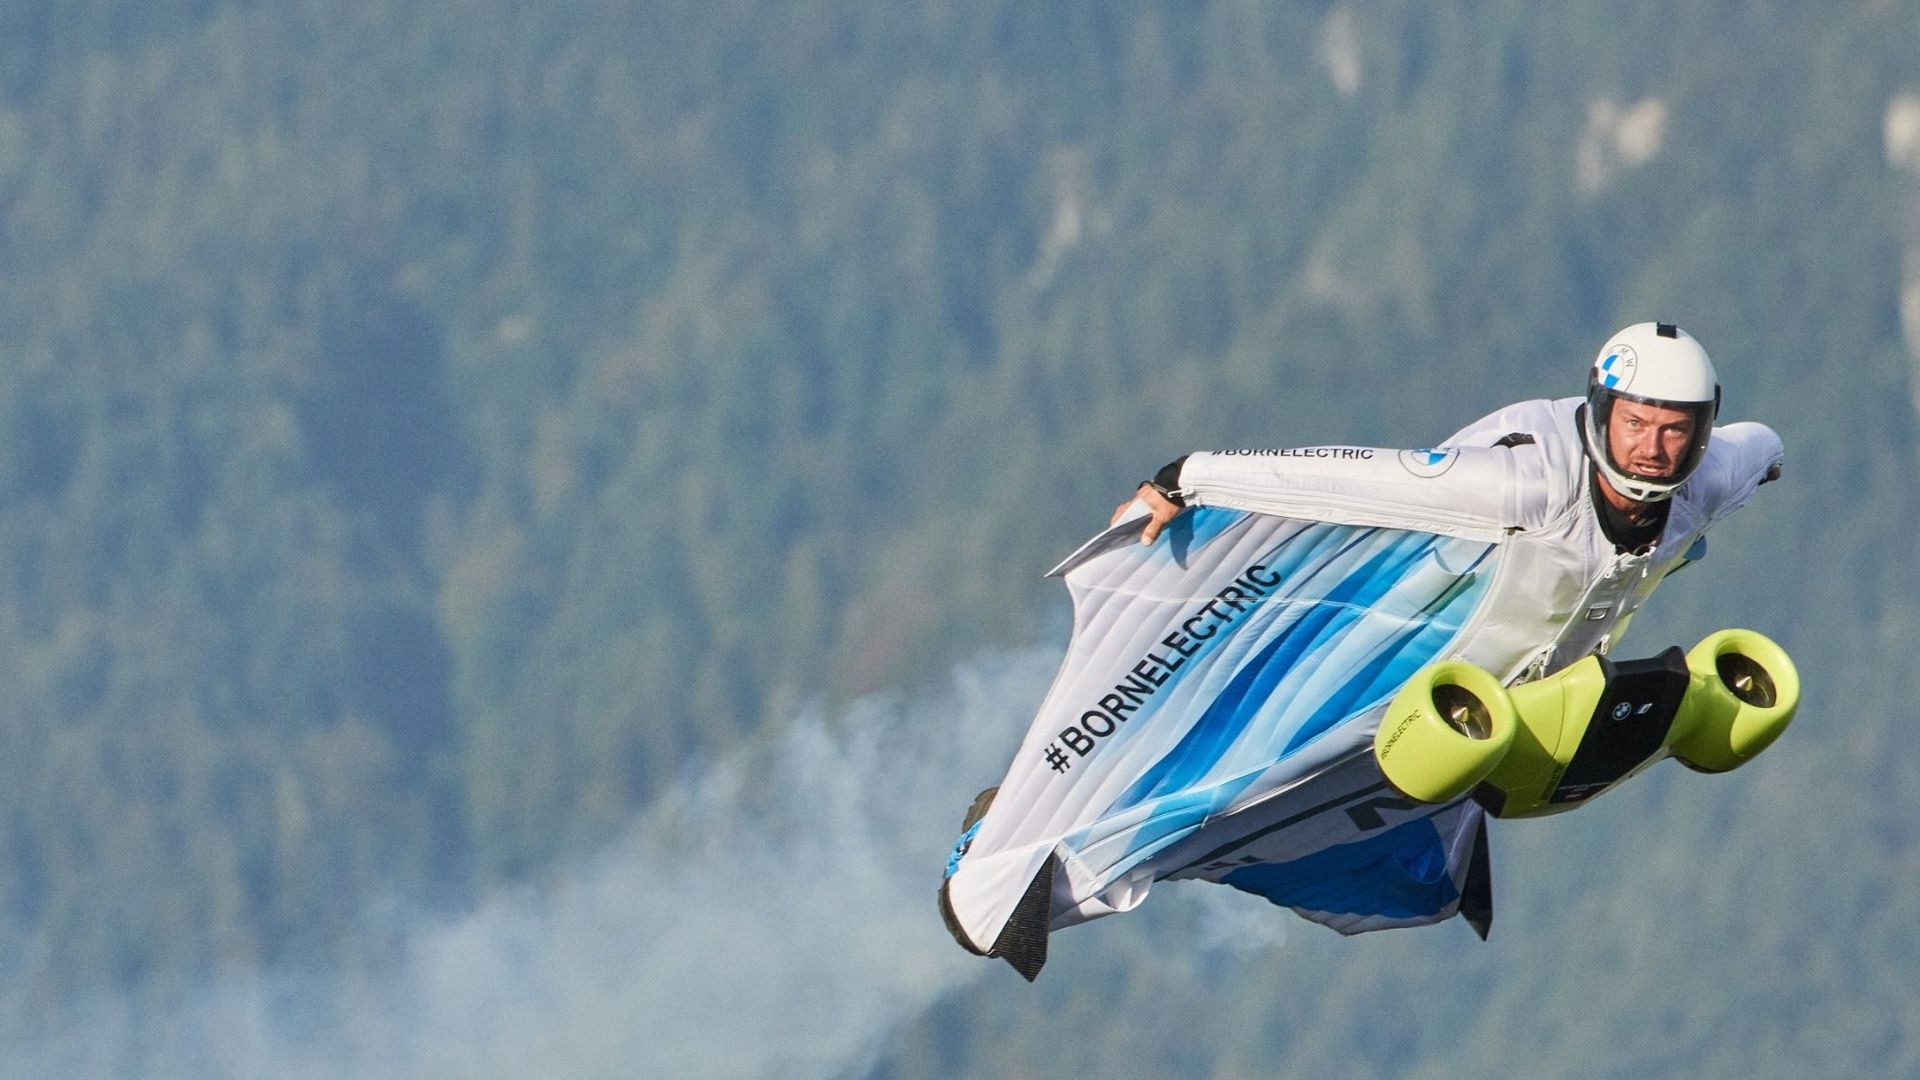 Flying with the BMW Wingsuit.